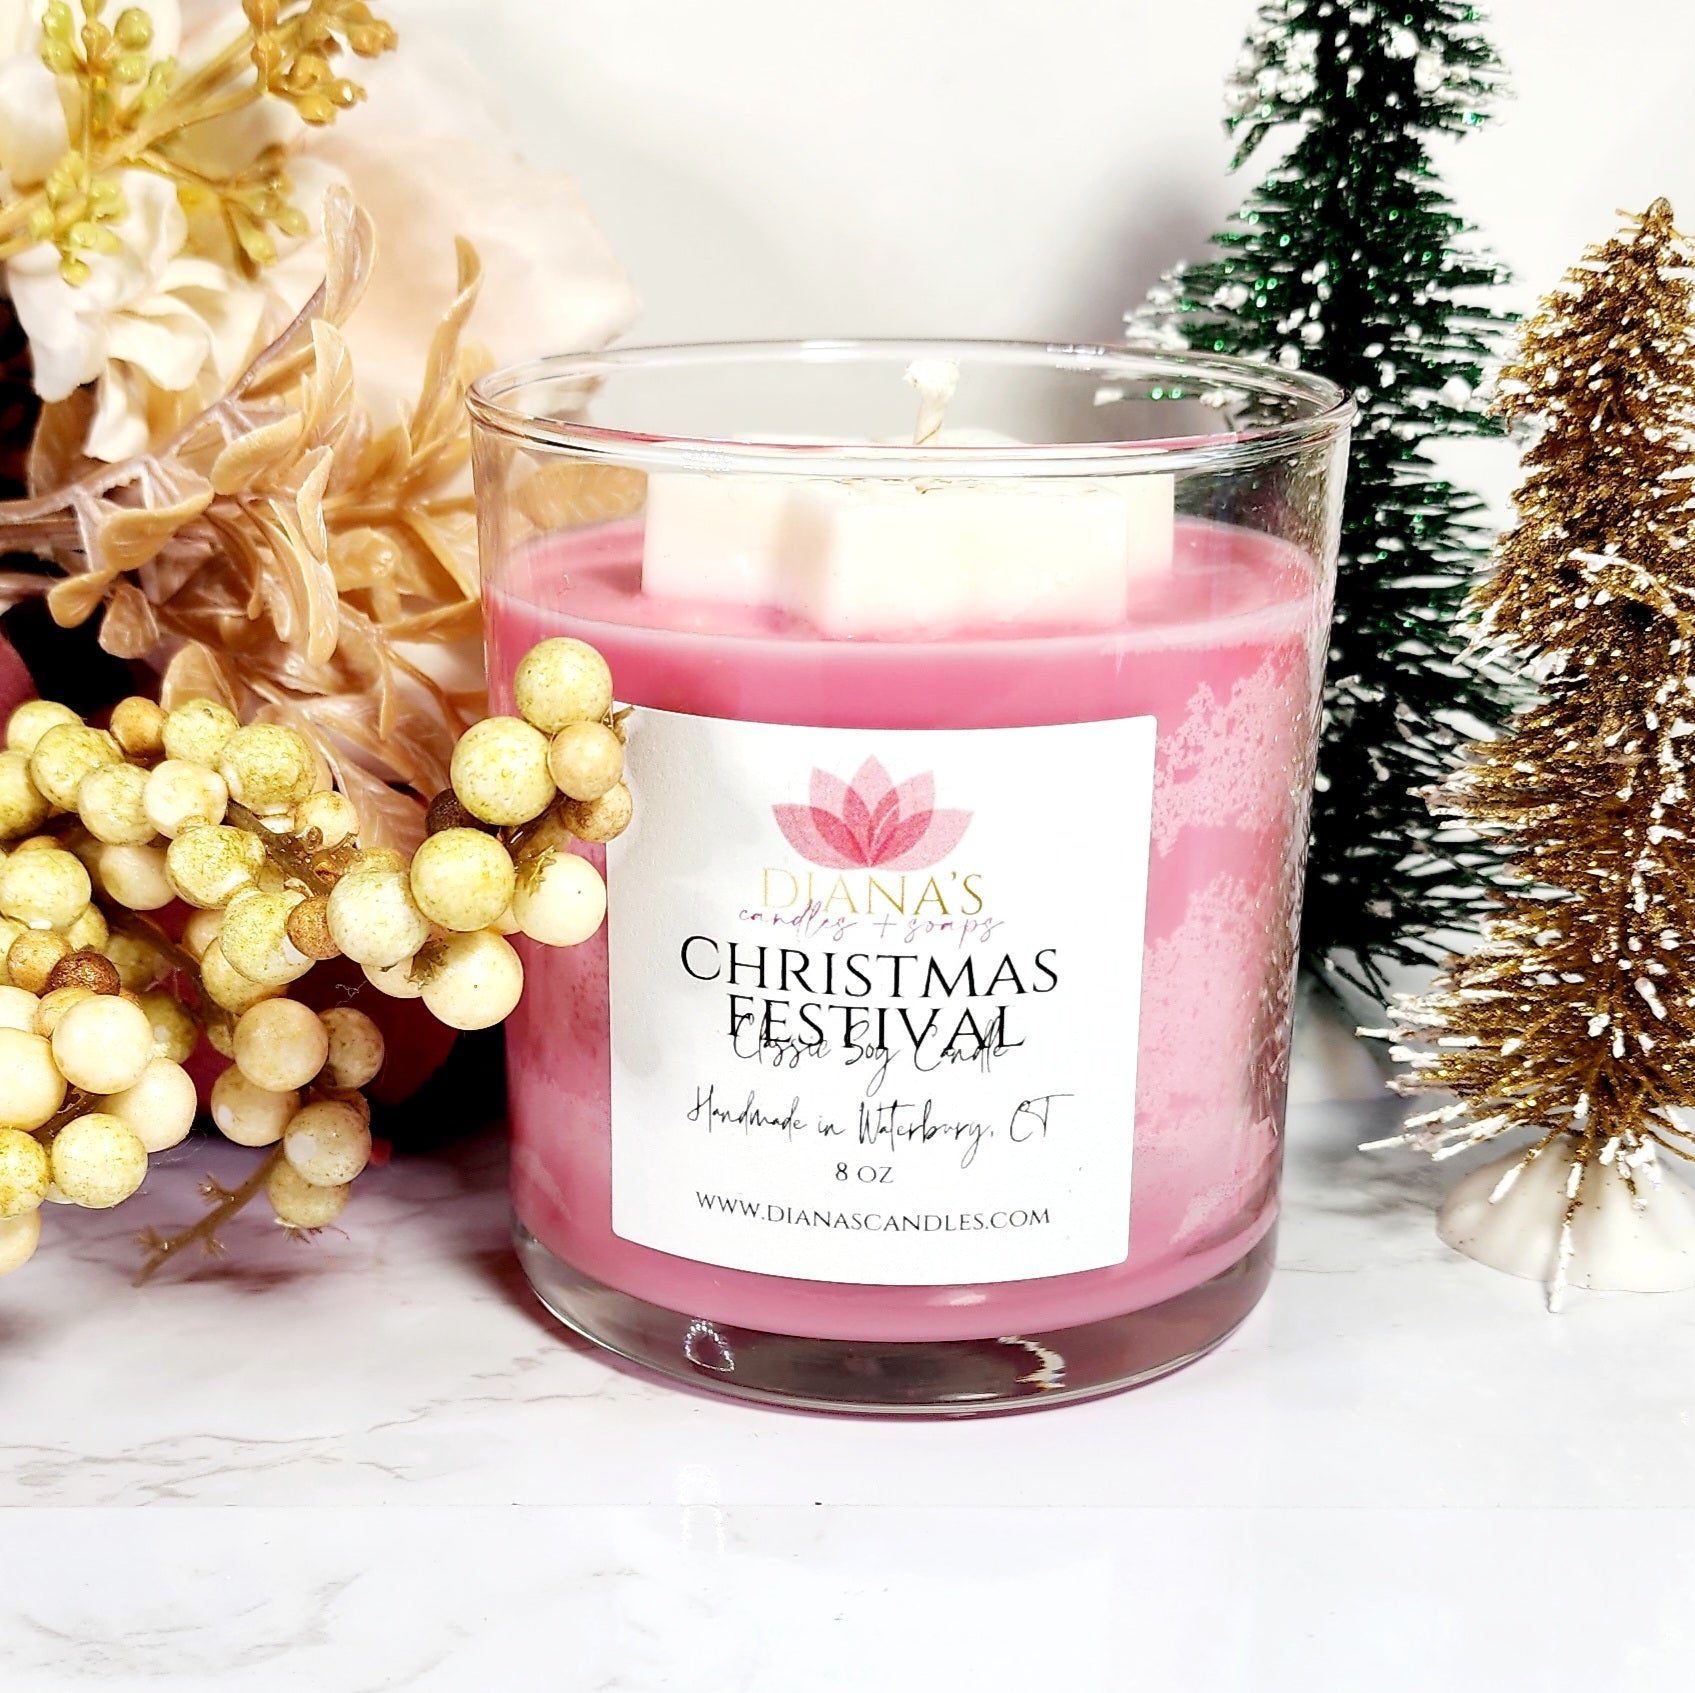 Christmas Festival Candle - Diana's Candles and Soaps 